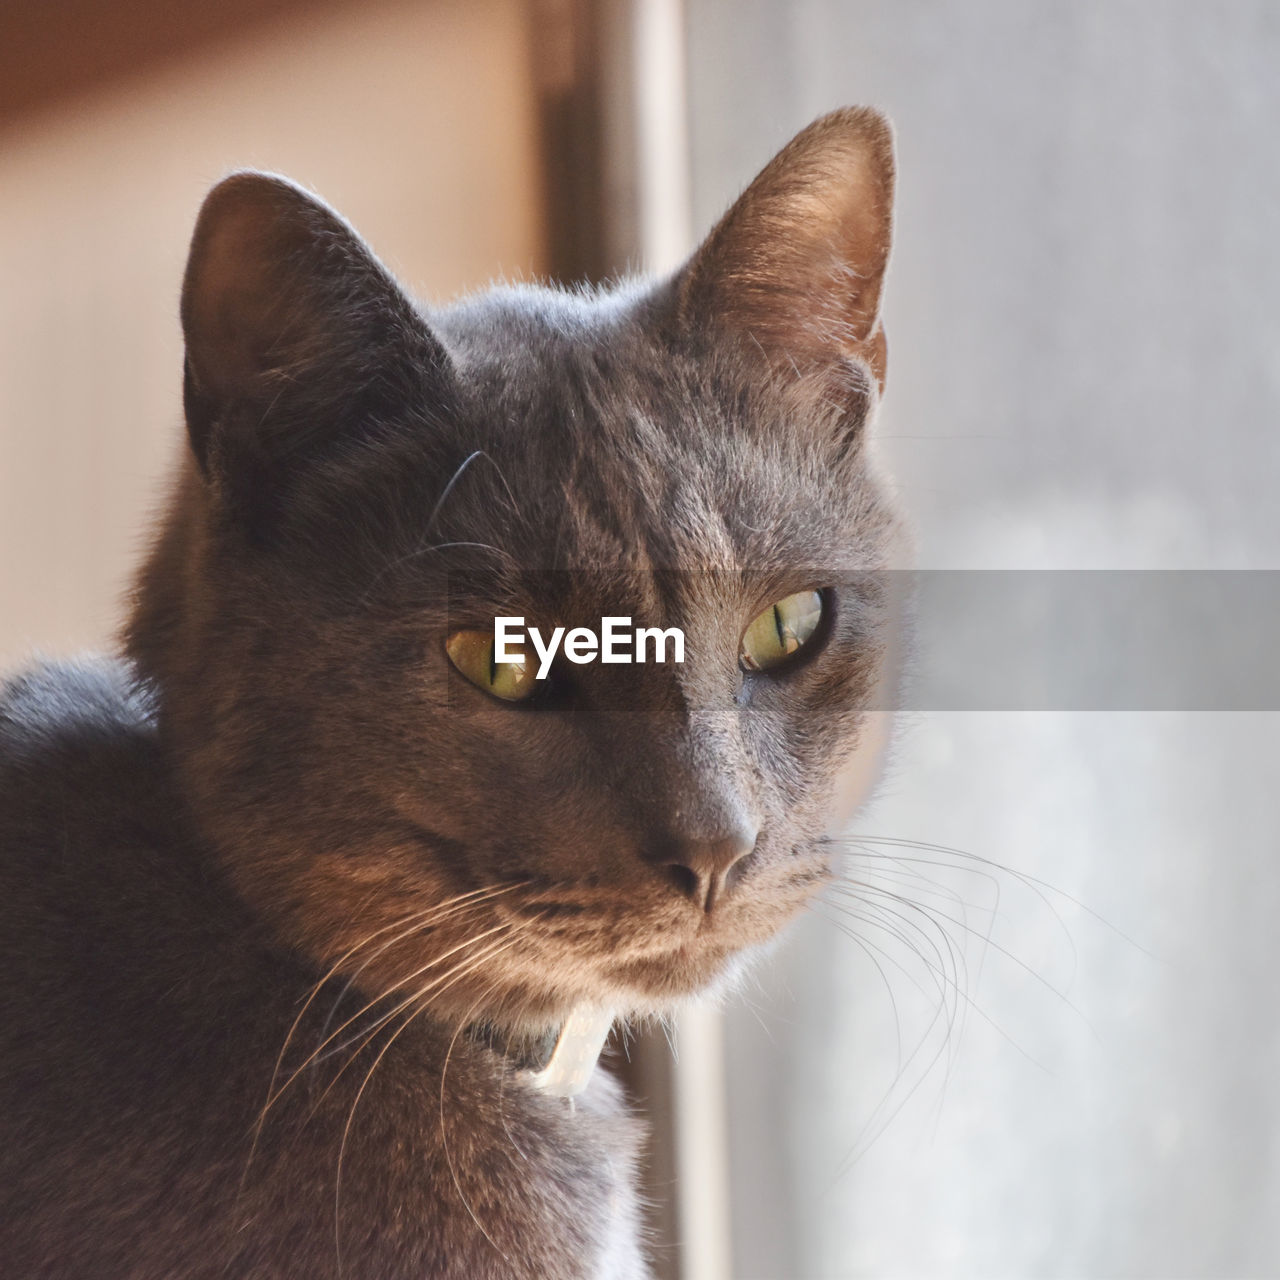 animal, animal themes, cat, pet, mammal, domestic animals, domestic cat, one animal, feline, close-up, whiskers, animal body part, small to medium-sized cats, felidae, carnivore, no people, portrait, looking, indoors, animal hair, animal head, eye, nose, focus on foreground, looking away